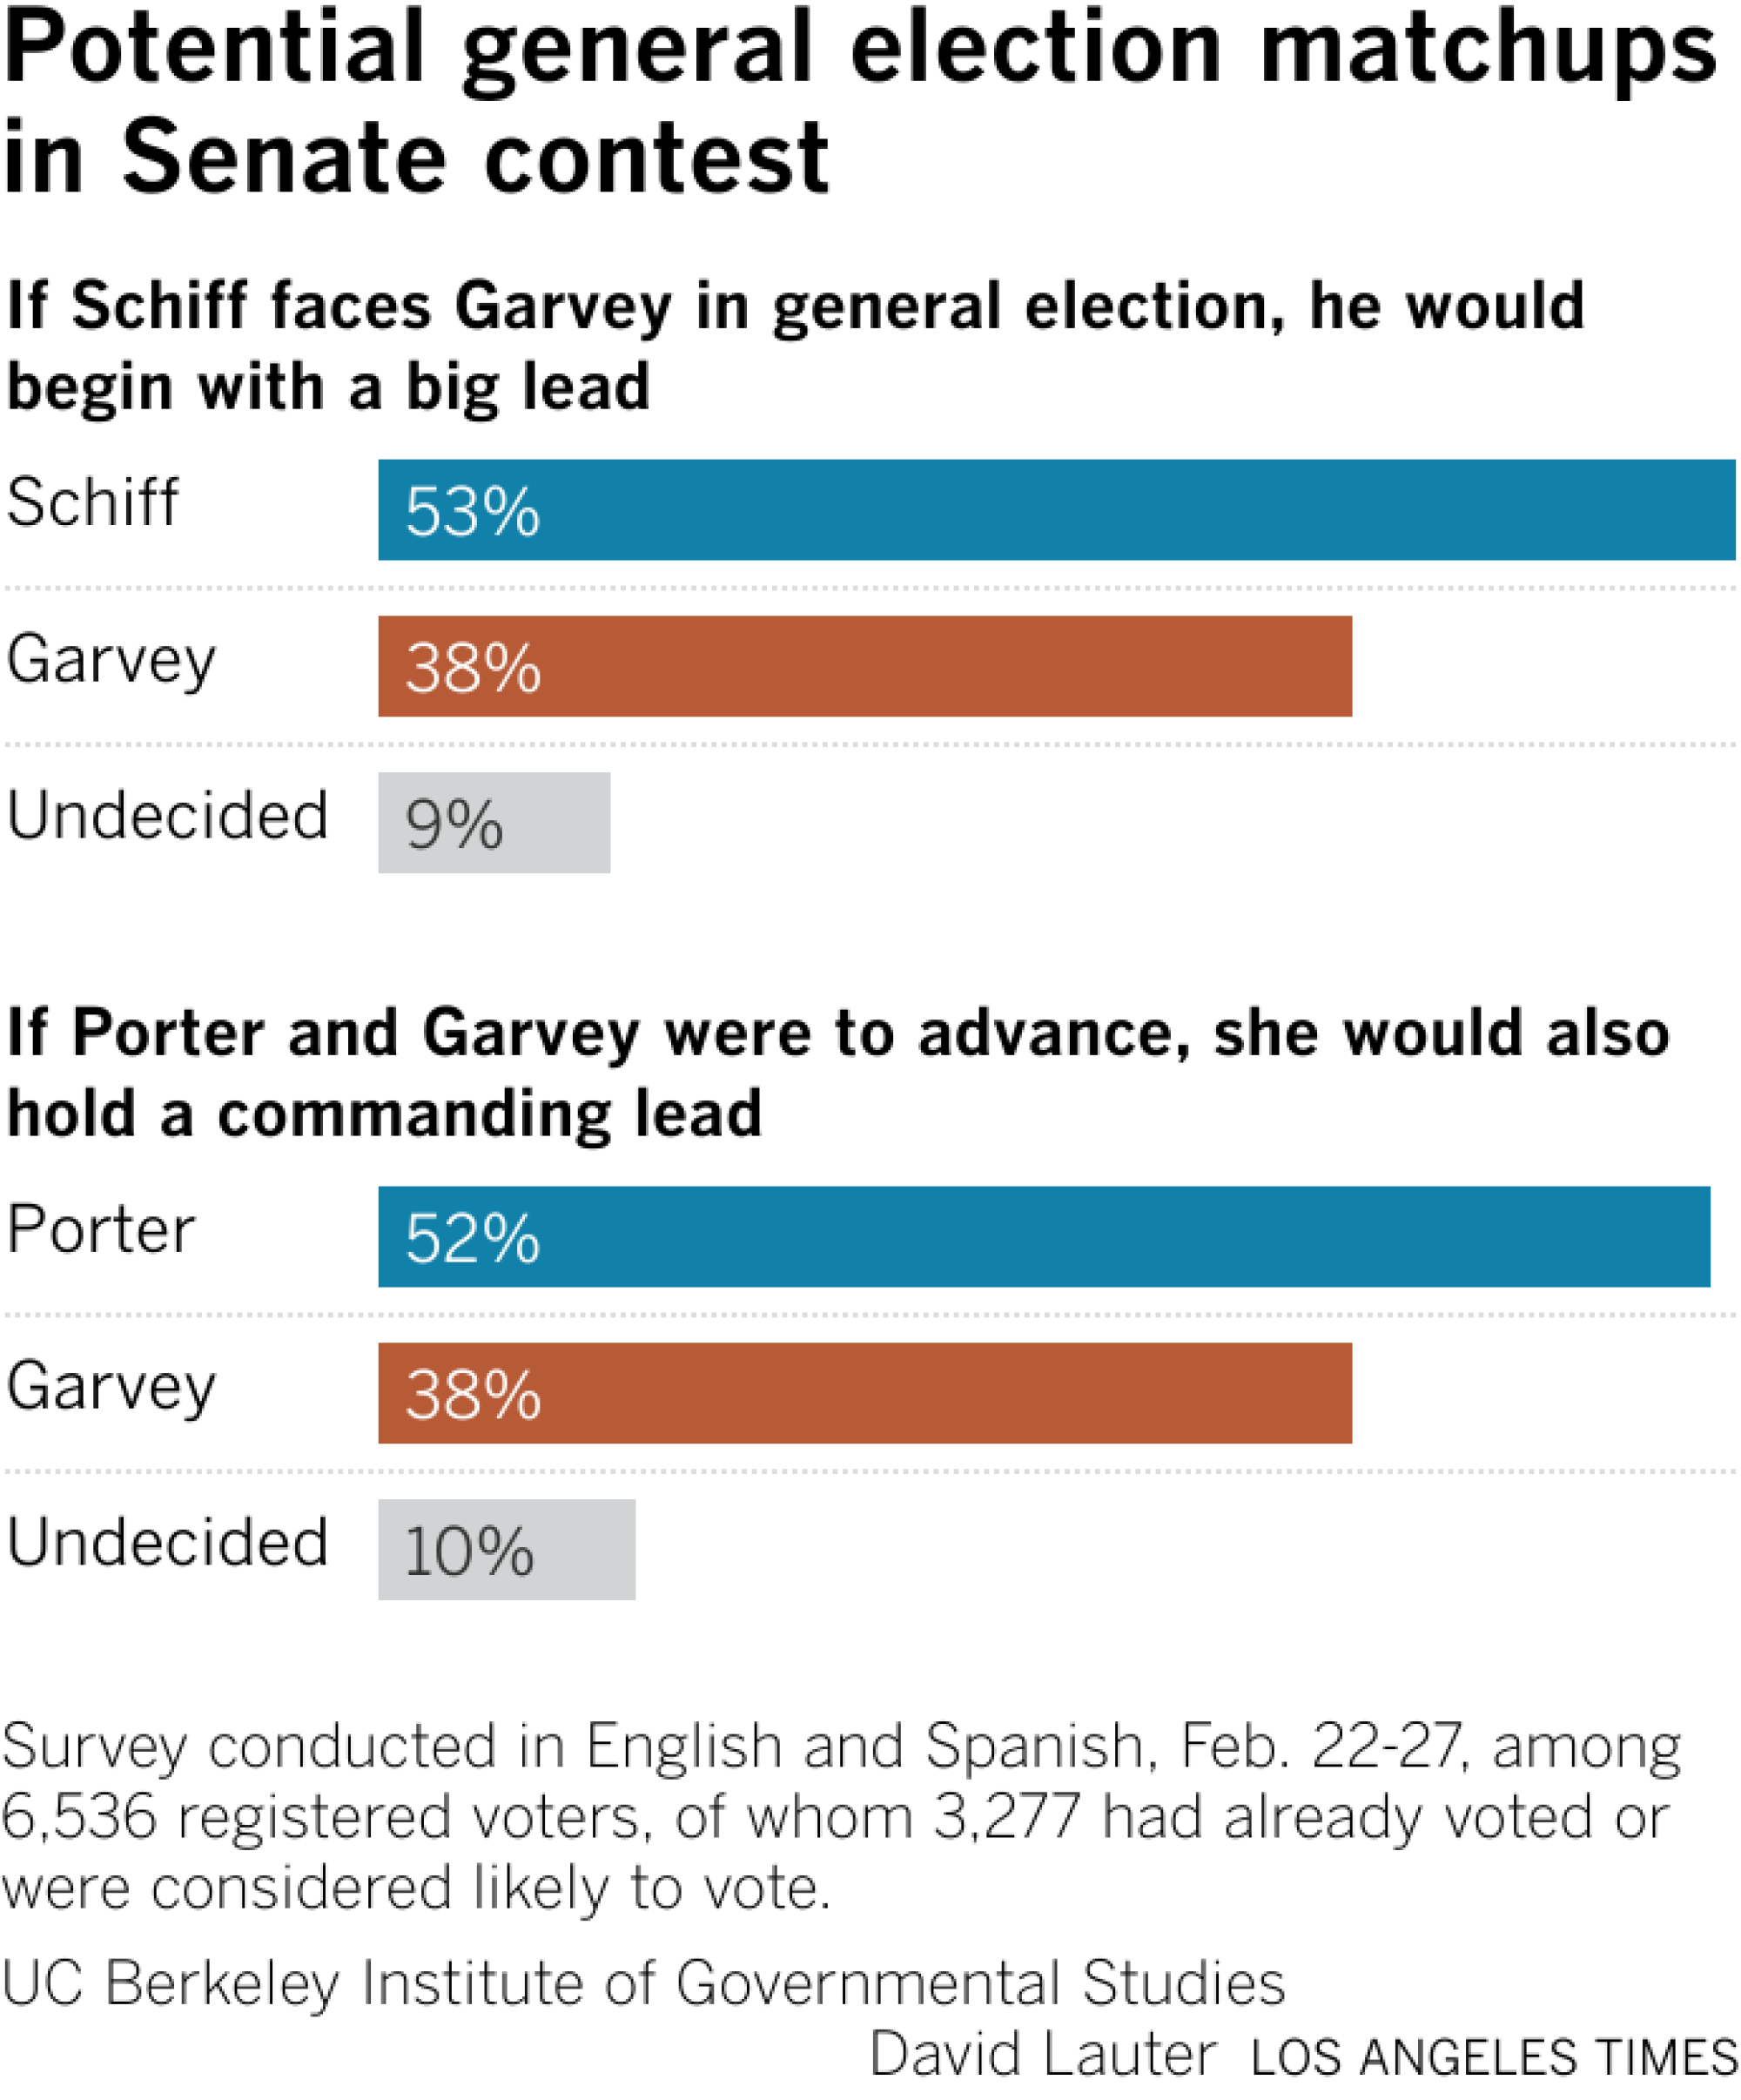 Bar chart shows the share of voters backing Schiff (53%), Garvey (38%) and undecided (9%)